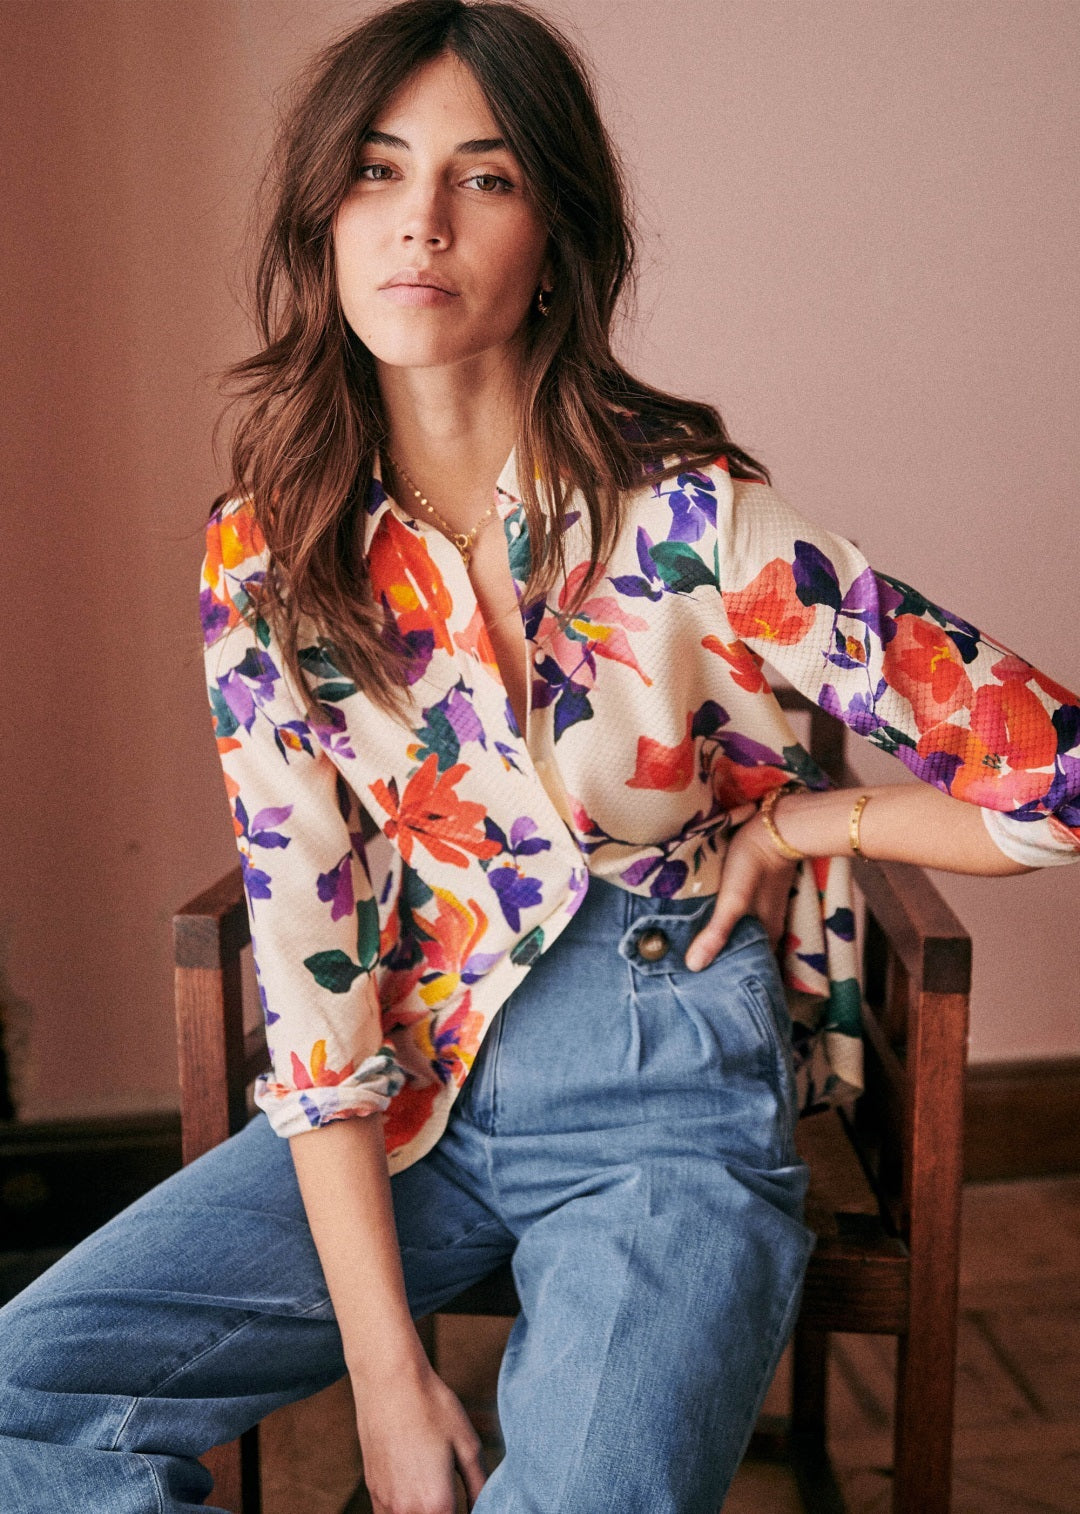 Floral flair for cooler weather: long sleeve Hawaiian shirt with a blooming design.